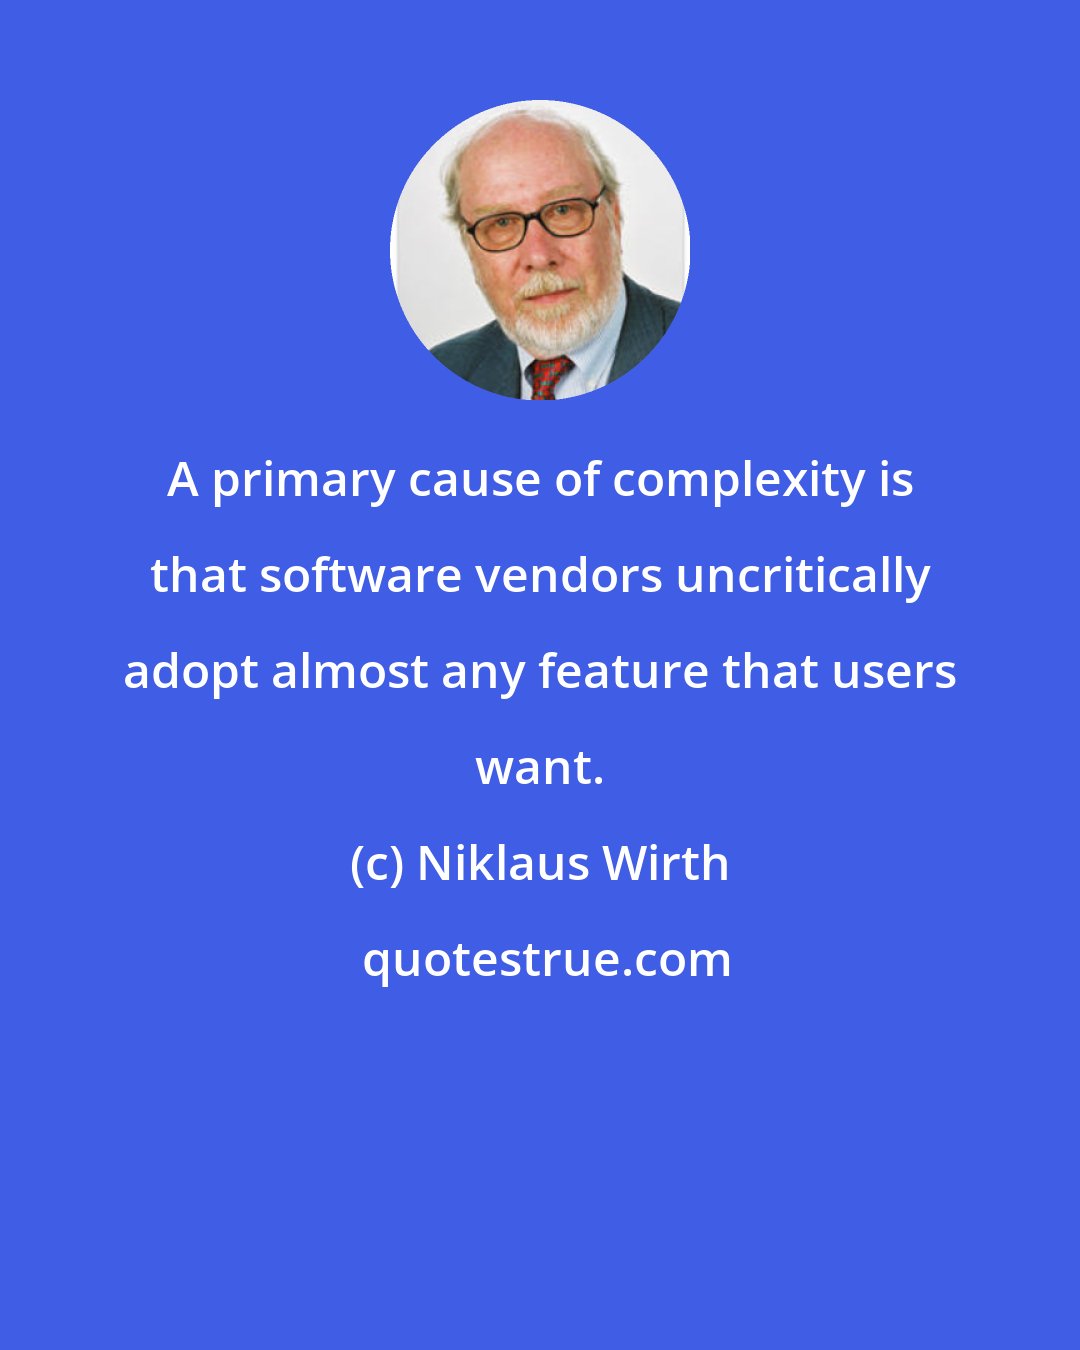 Niklaus Wirth: A primary cause of complexity is that software vendors uncritically adopt almost any feature that users want.